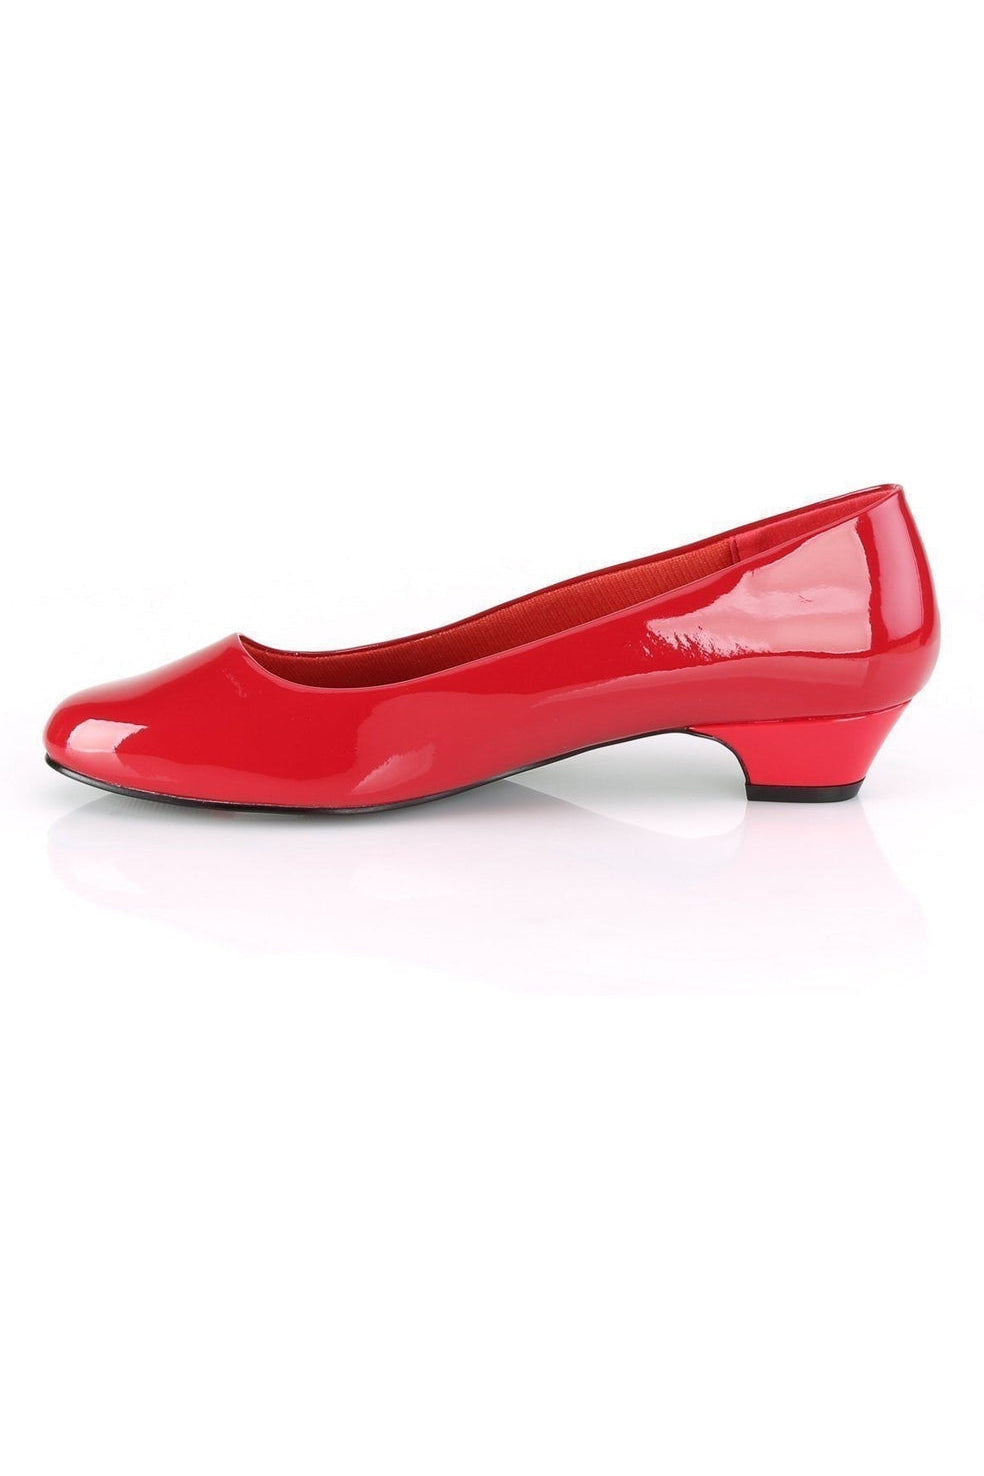 GWEN-01 Pump | Red Patent-Pleaser Pink Label-SEXYSHOES.COM